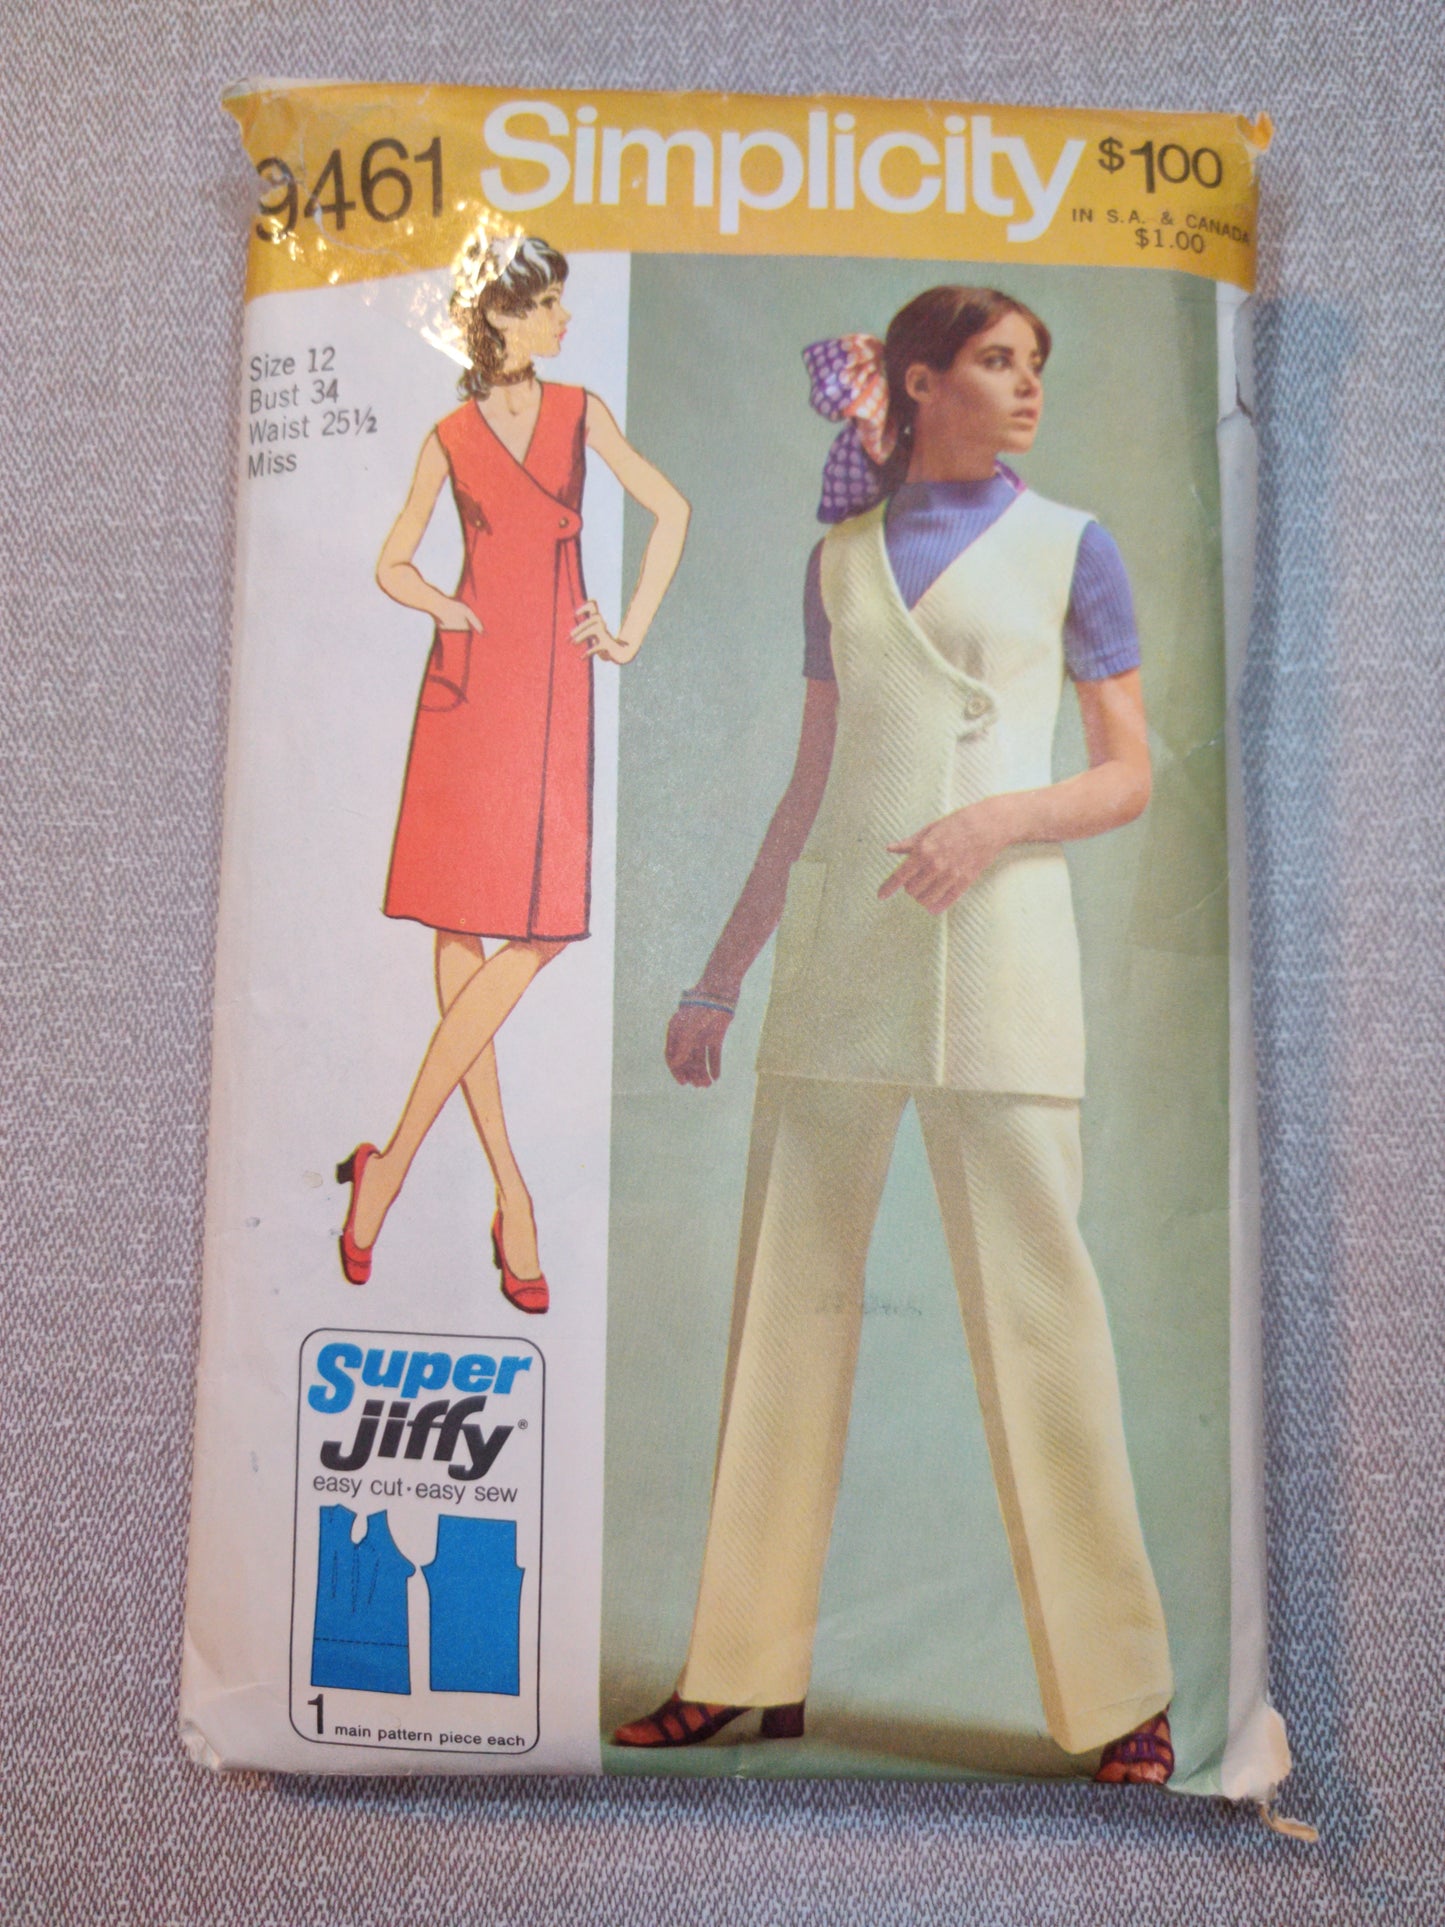 Simplicity 9461 Size 12 Bust 34